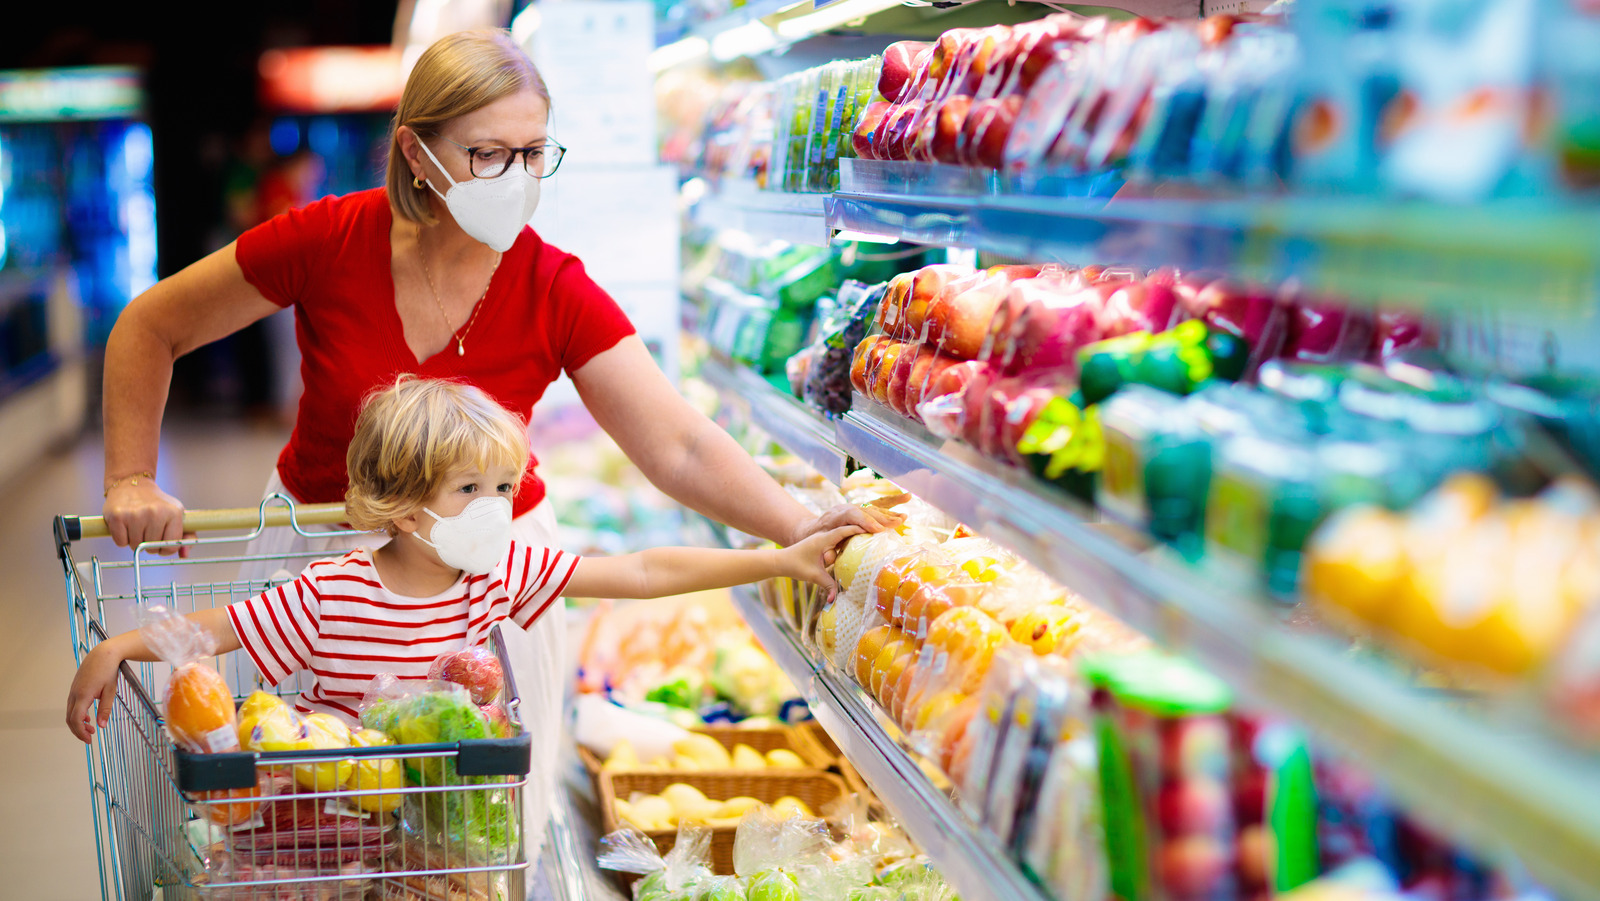 Why You May Be Paying The Same Price For Less Food At The Grocery Store.